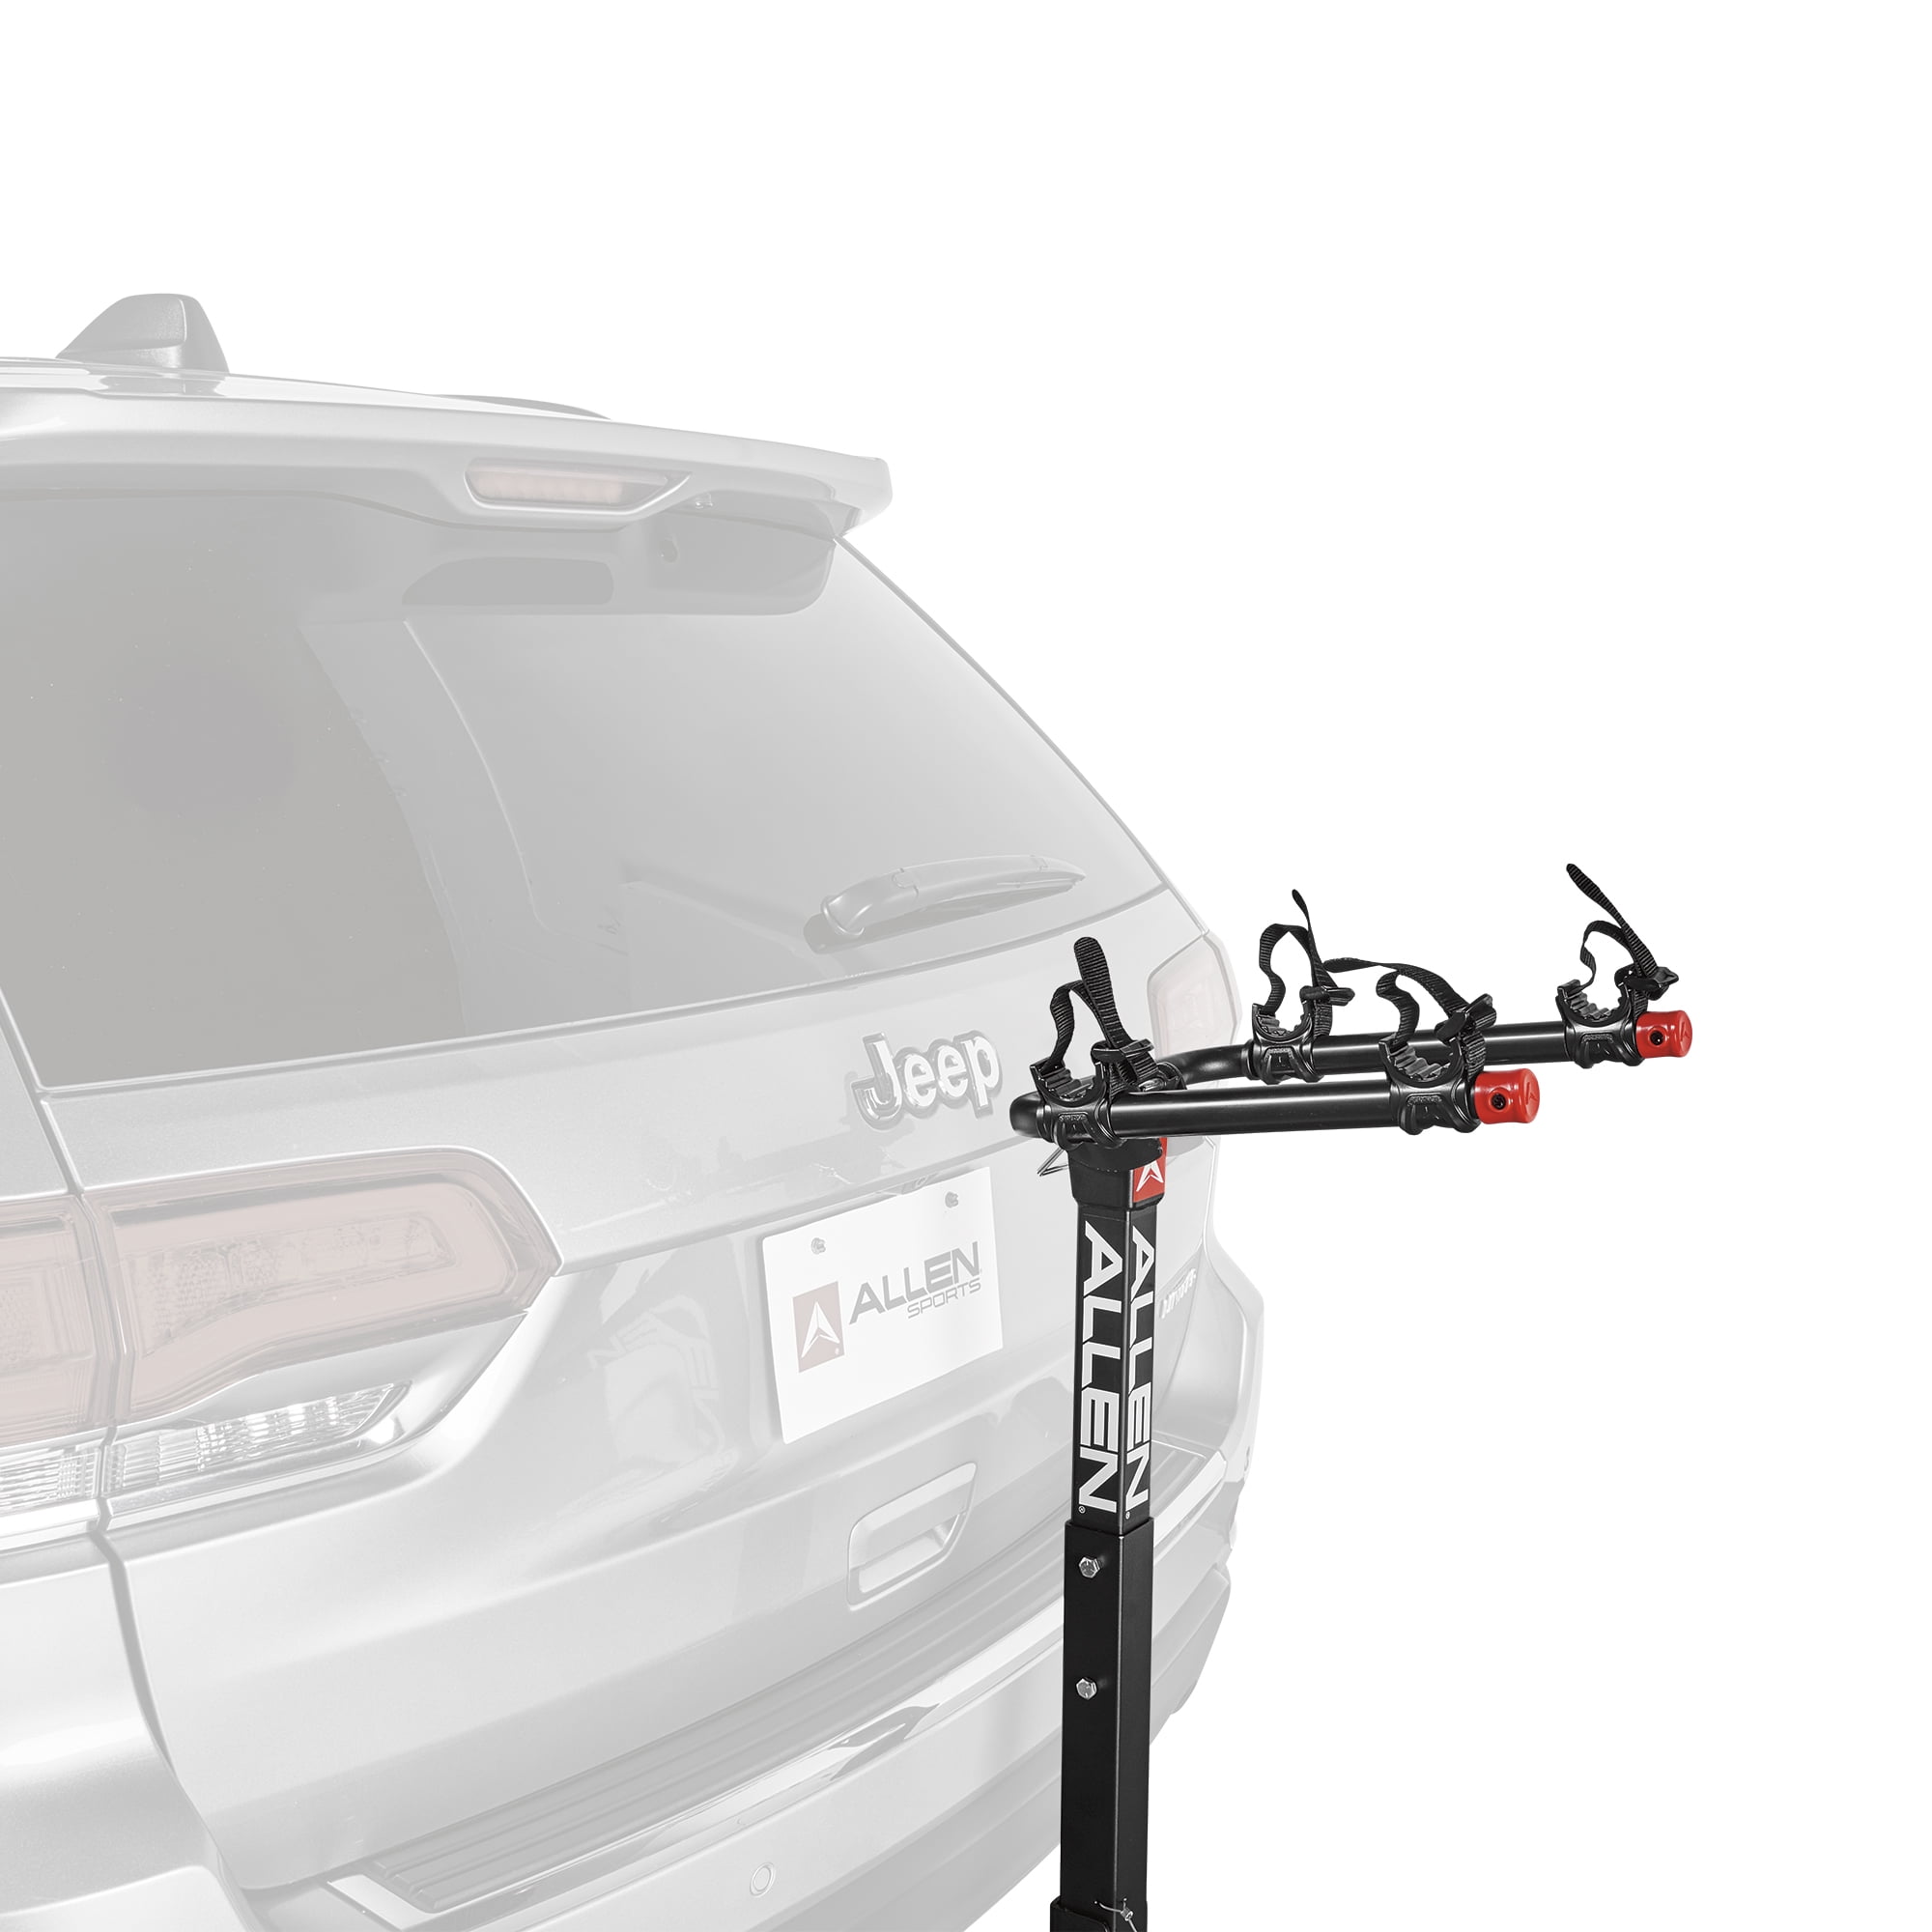 Hitch Details about   Allen Sports 4-Bike Hitch Racks For 2 In 